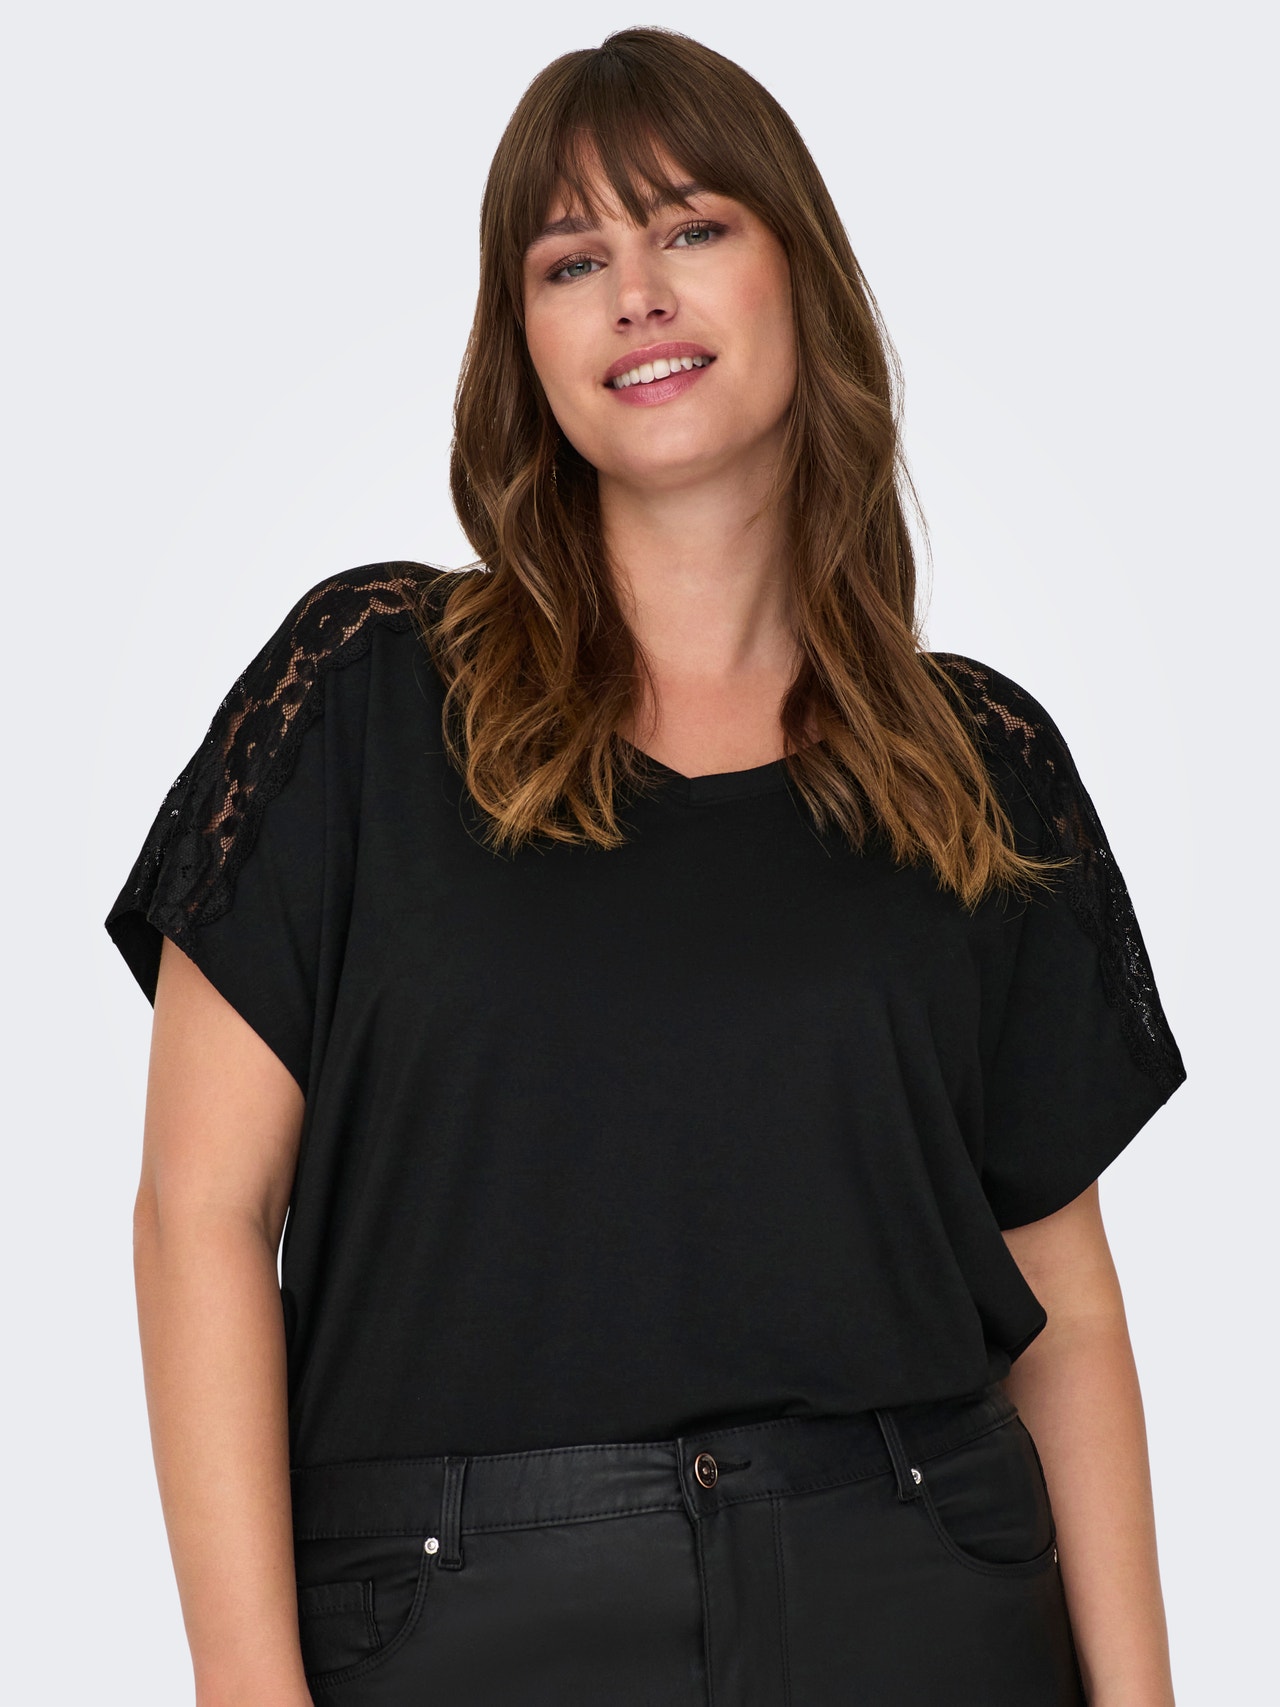 ONLY Curvy short sleeved top -Black - 15303010